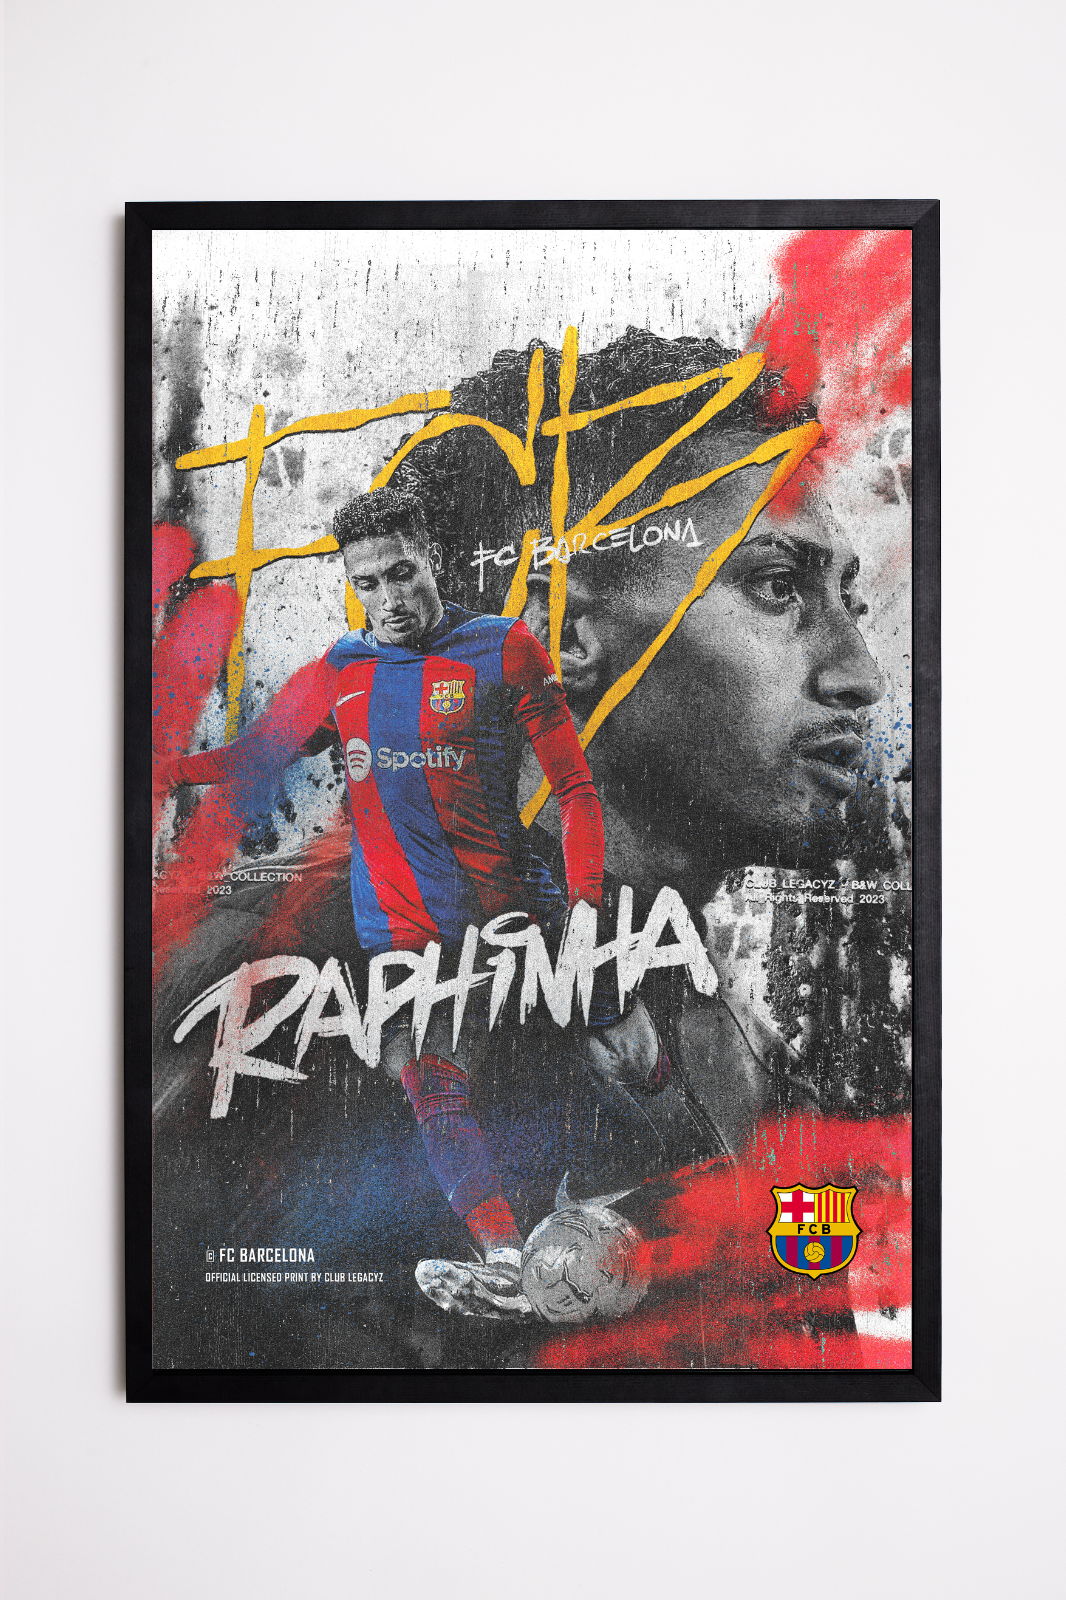 FC Barcelona - Raphinha Black & White Poster limited to 100